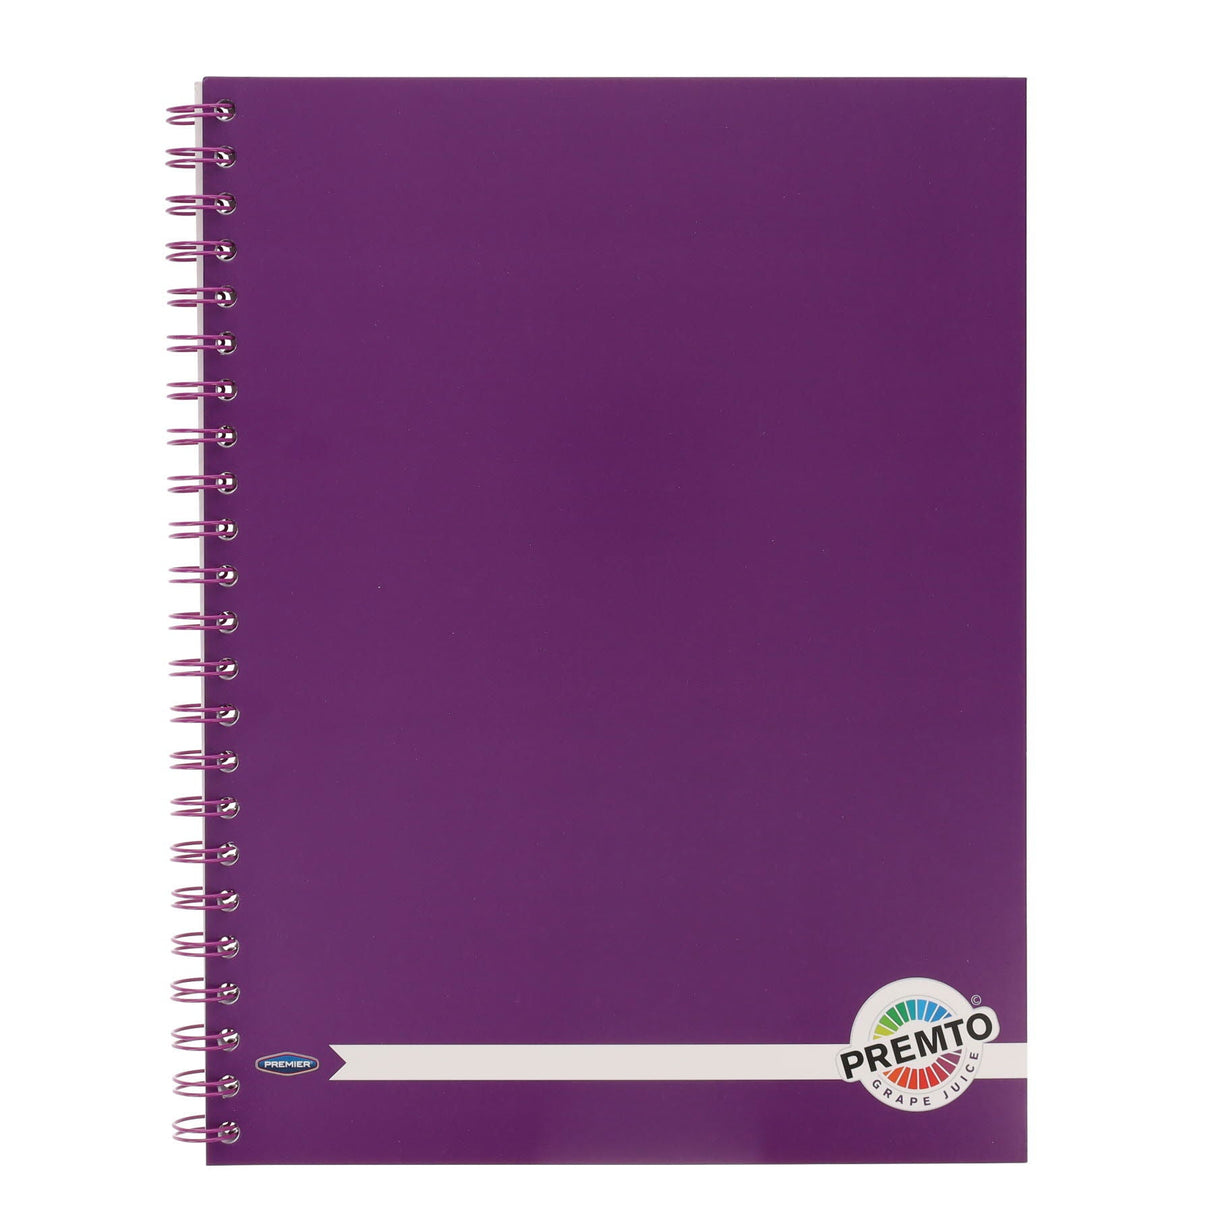 Premto A4 Wiro Notebook - 200 Pages - Grape Juice-A4 Notebooks- Buy Online at Stationery Shop UK